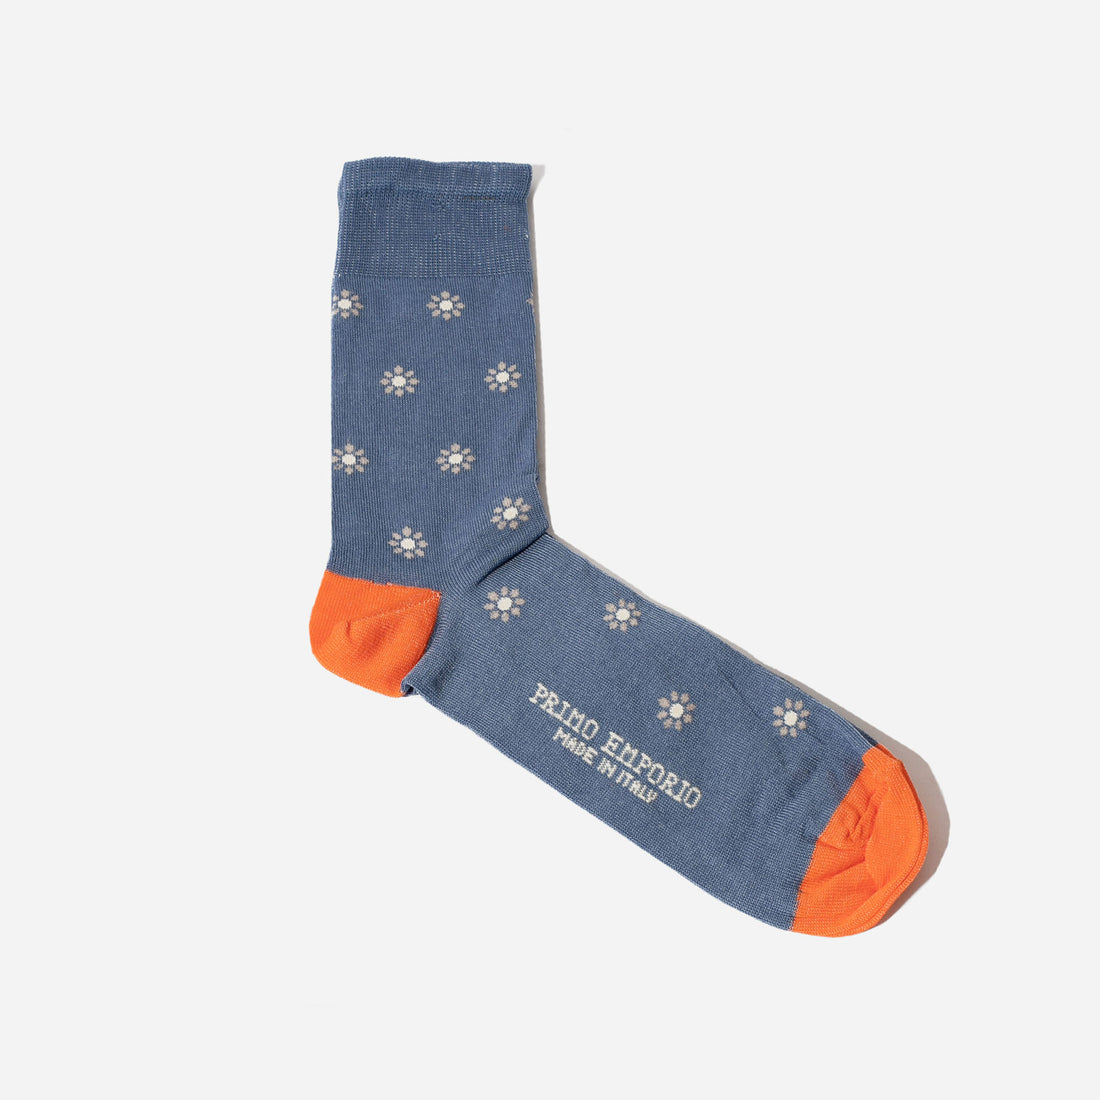 Sock with Daisies - Light blue